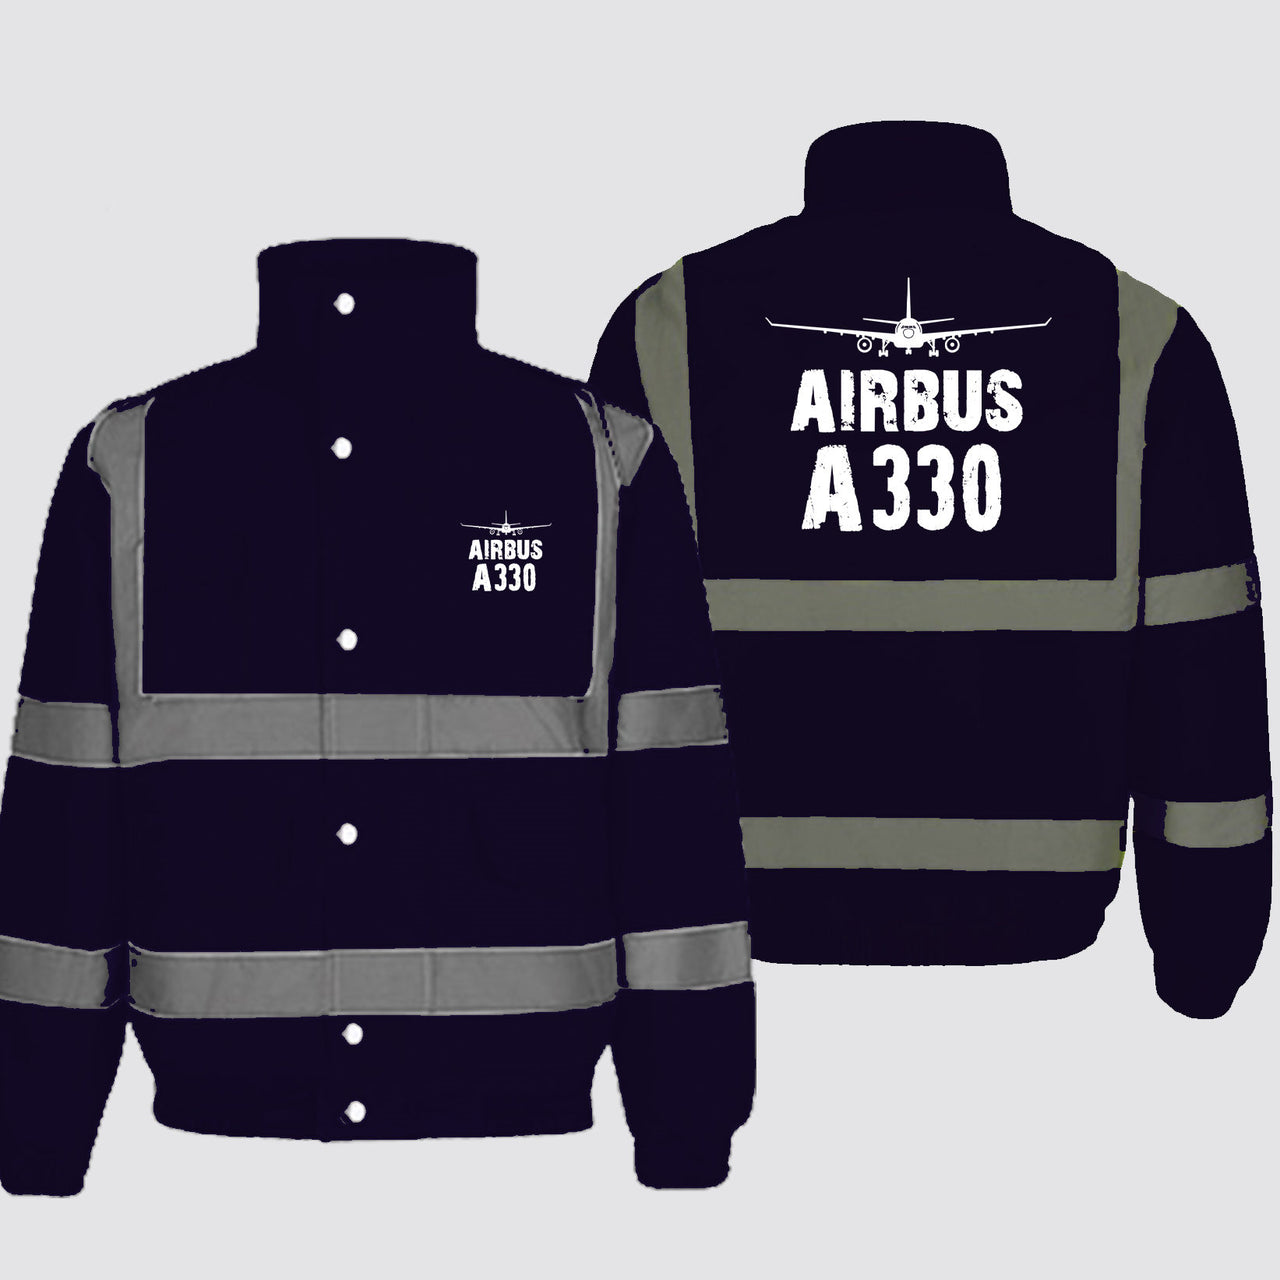 Airbus A330 & Plane Designed Reflective Winter Jackets